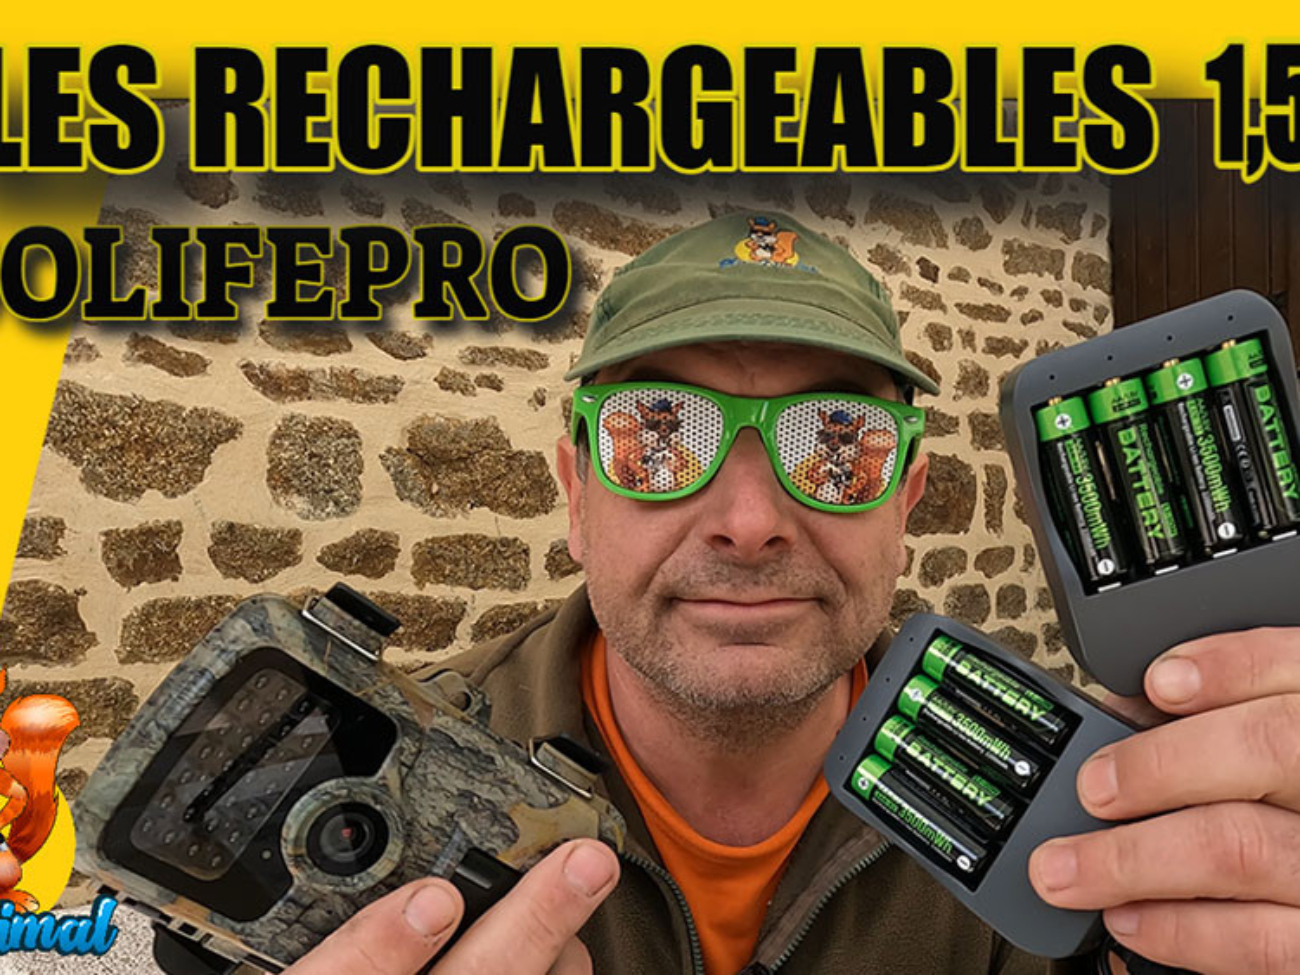 piles rechargeable 1,5V COOLIFEPRO